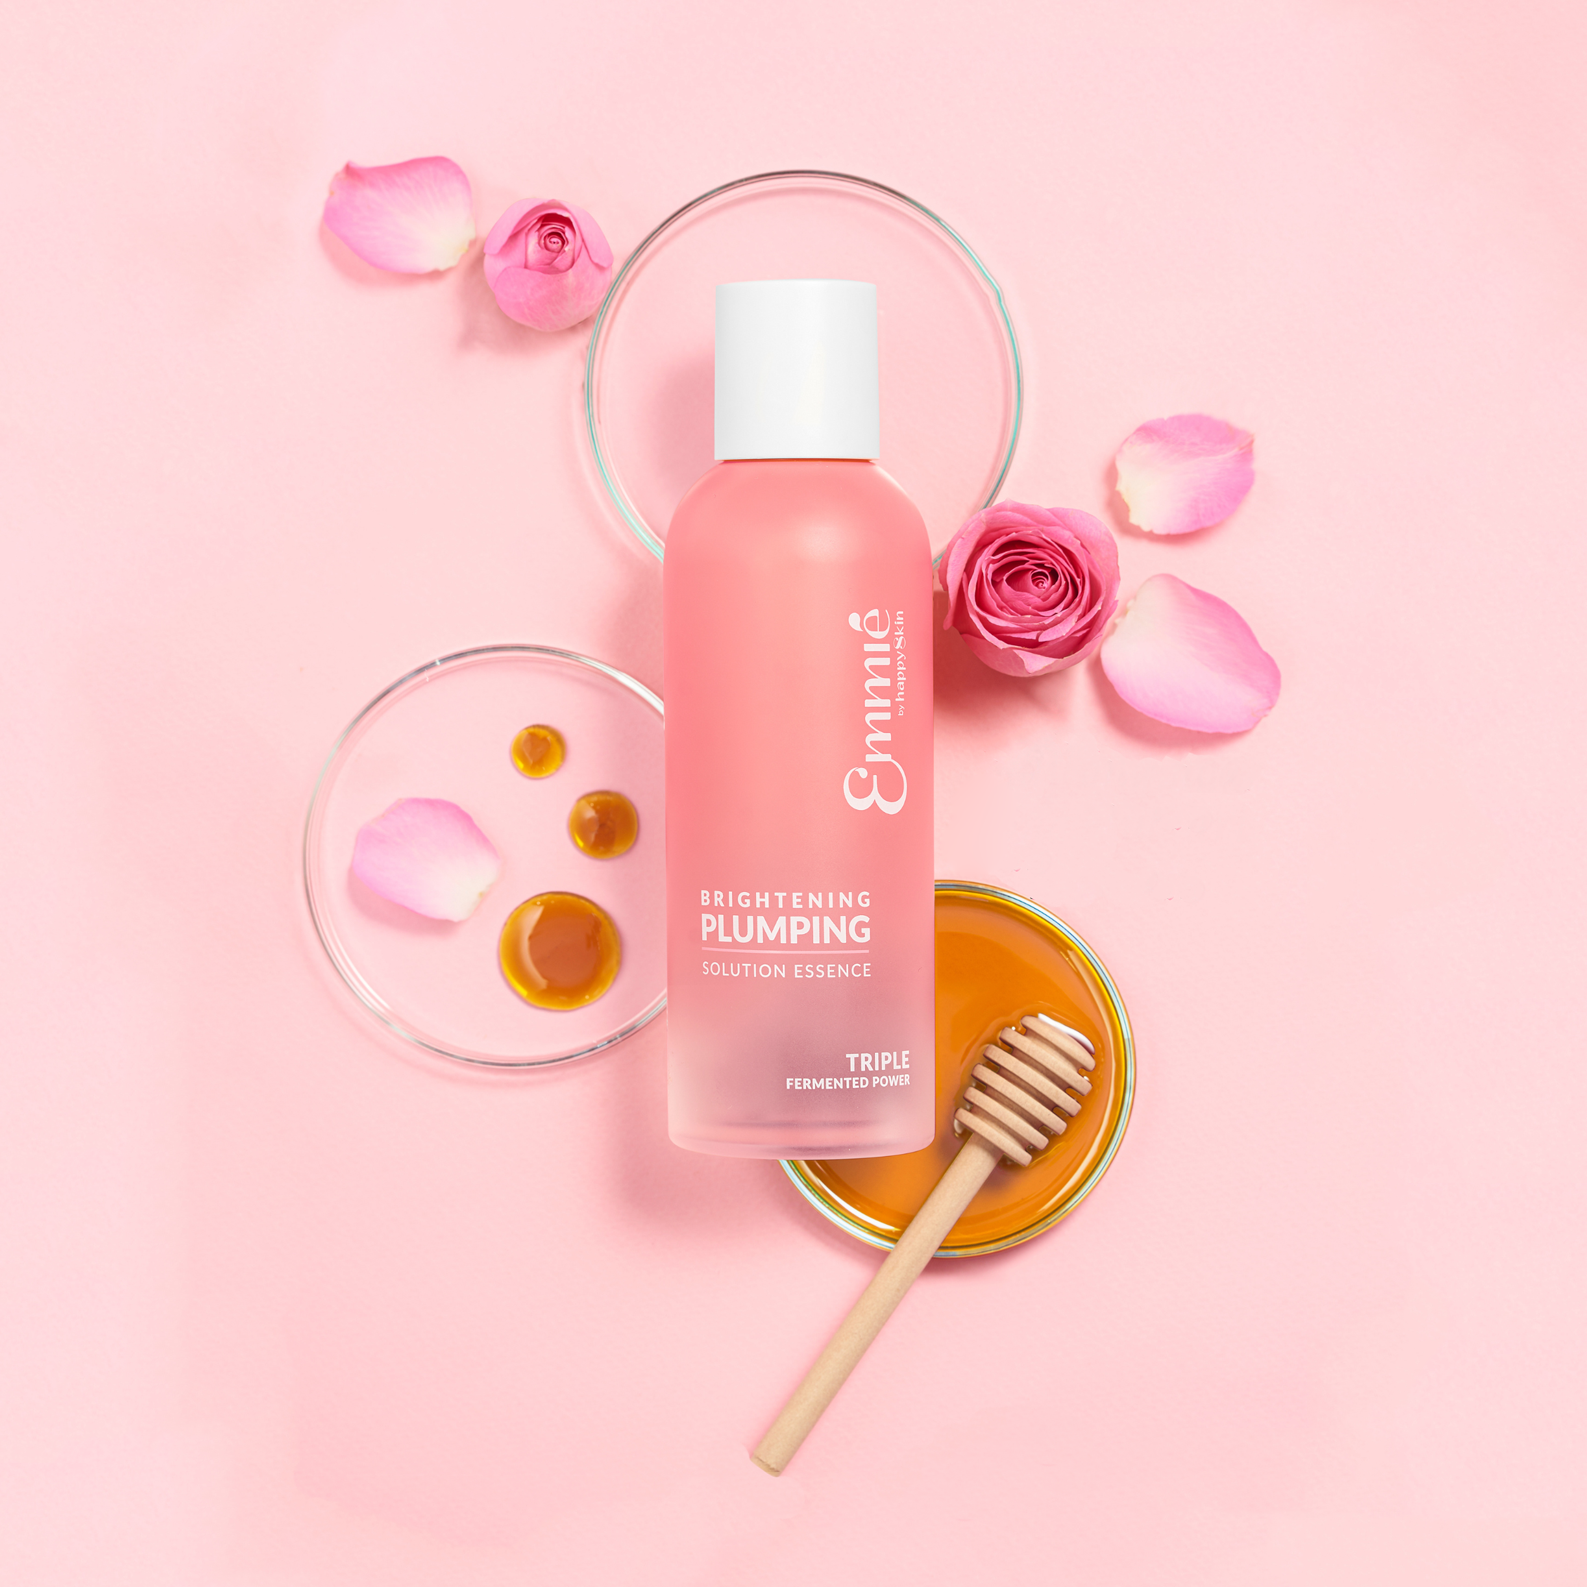 emmie-by-happyskin-nuoc-than-emmie-brightening-plumping-solution-essence-2